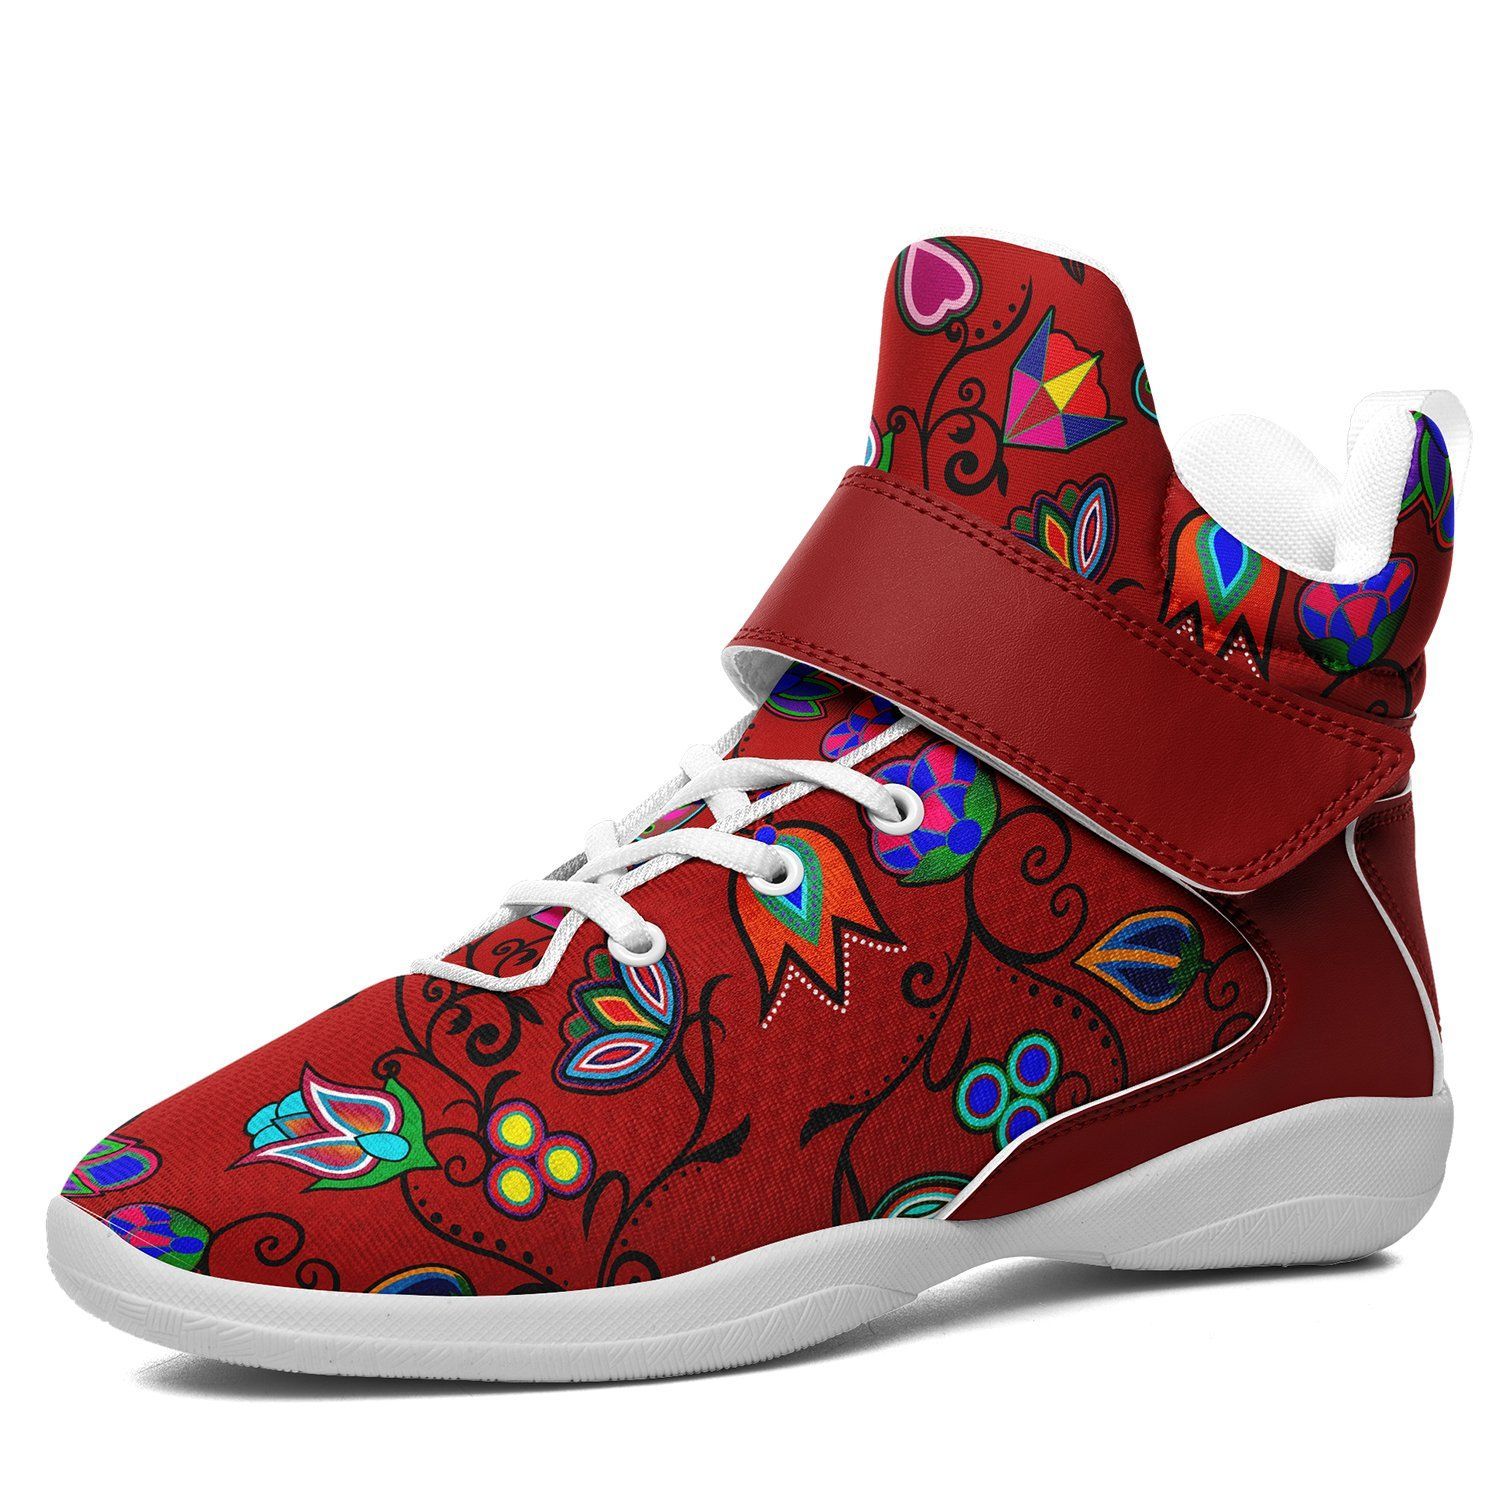 Indigenous Paisley Dahlia Kid's Ipottaa Basketball / Sport High Top Shoes 49 Dzine US Child 12.5 / EUR 30 White Sole with Dark Red Strap 